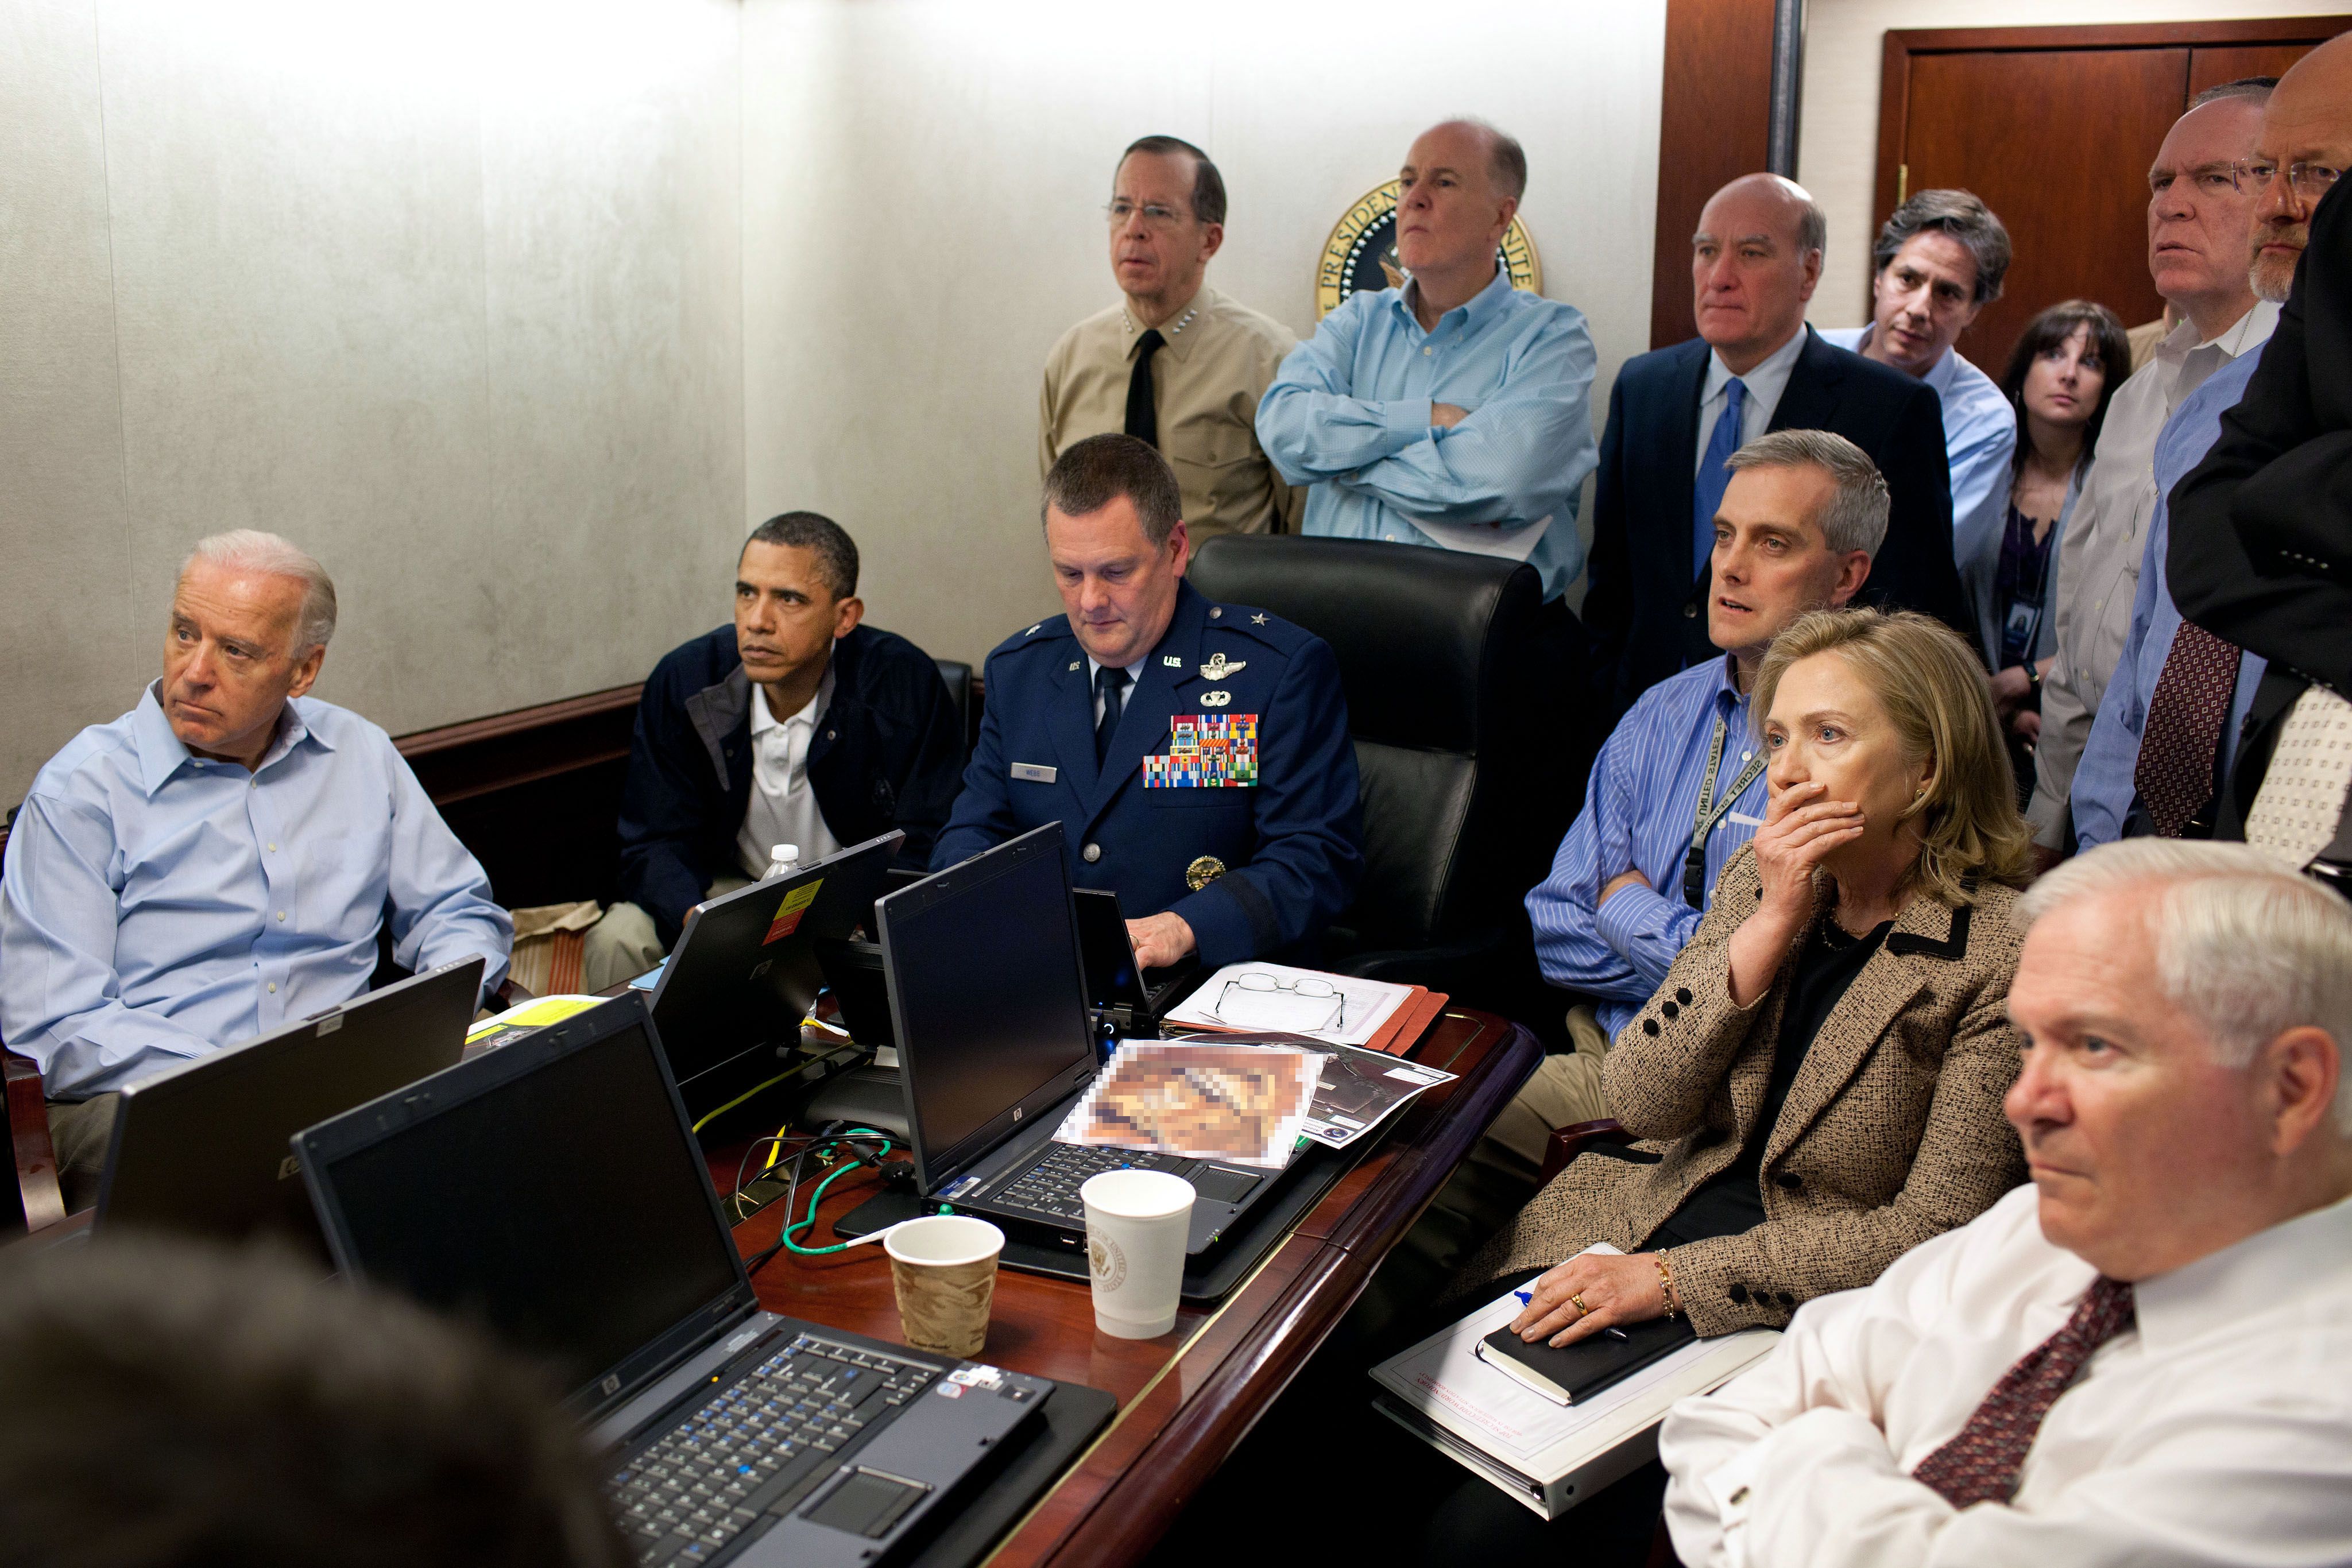 President Obama and his crew watch "2 Girls 1 Cup" together